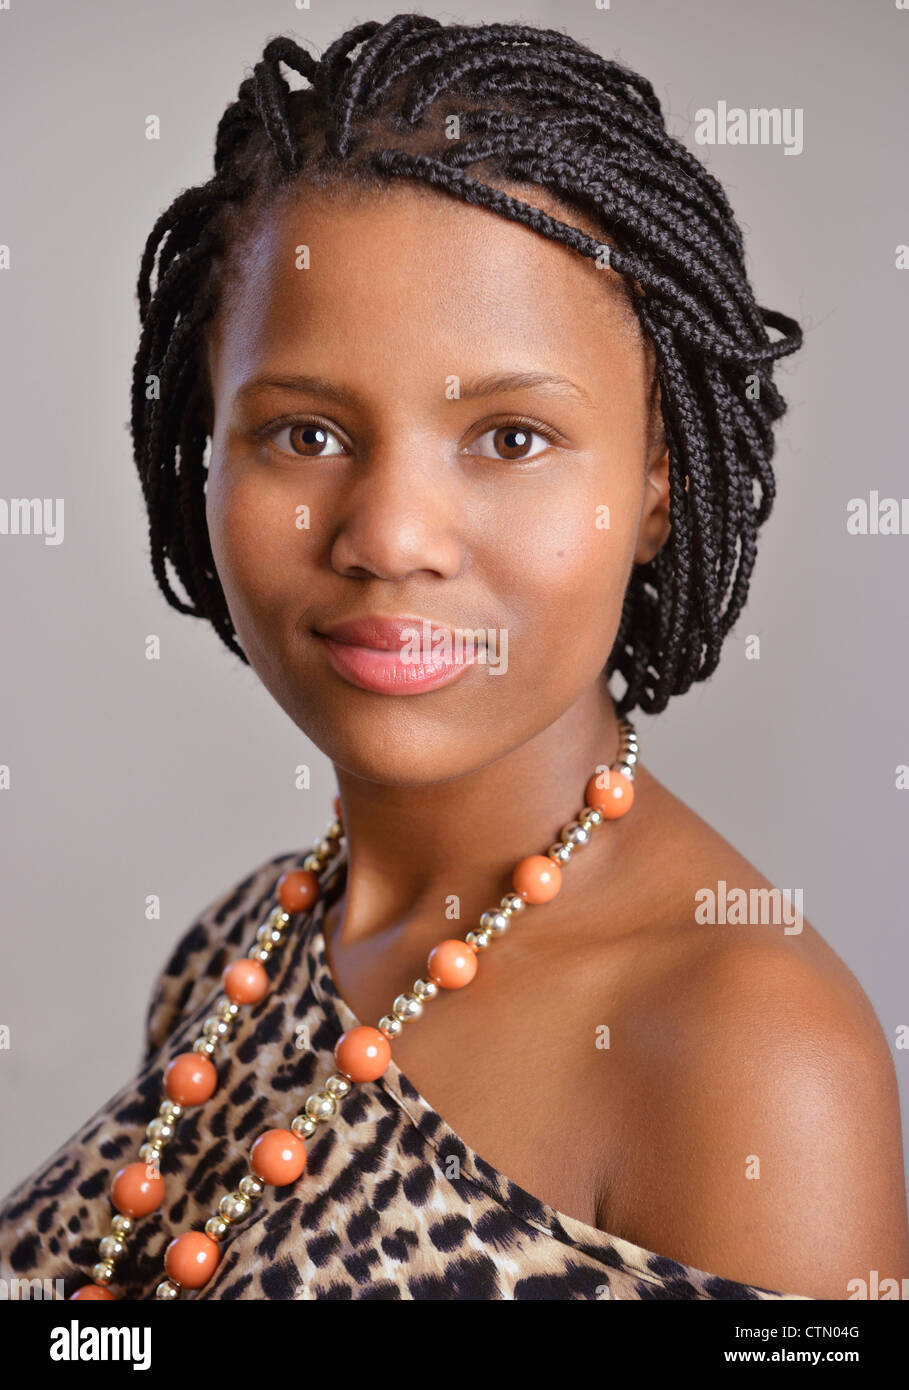 Portrait of a young African woman wearing beads, Observatory, Cape Town Stock Photo